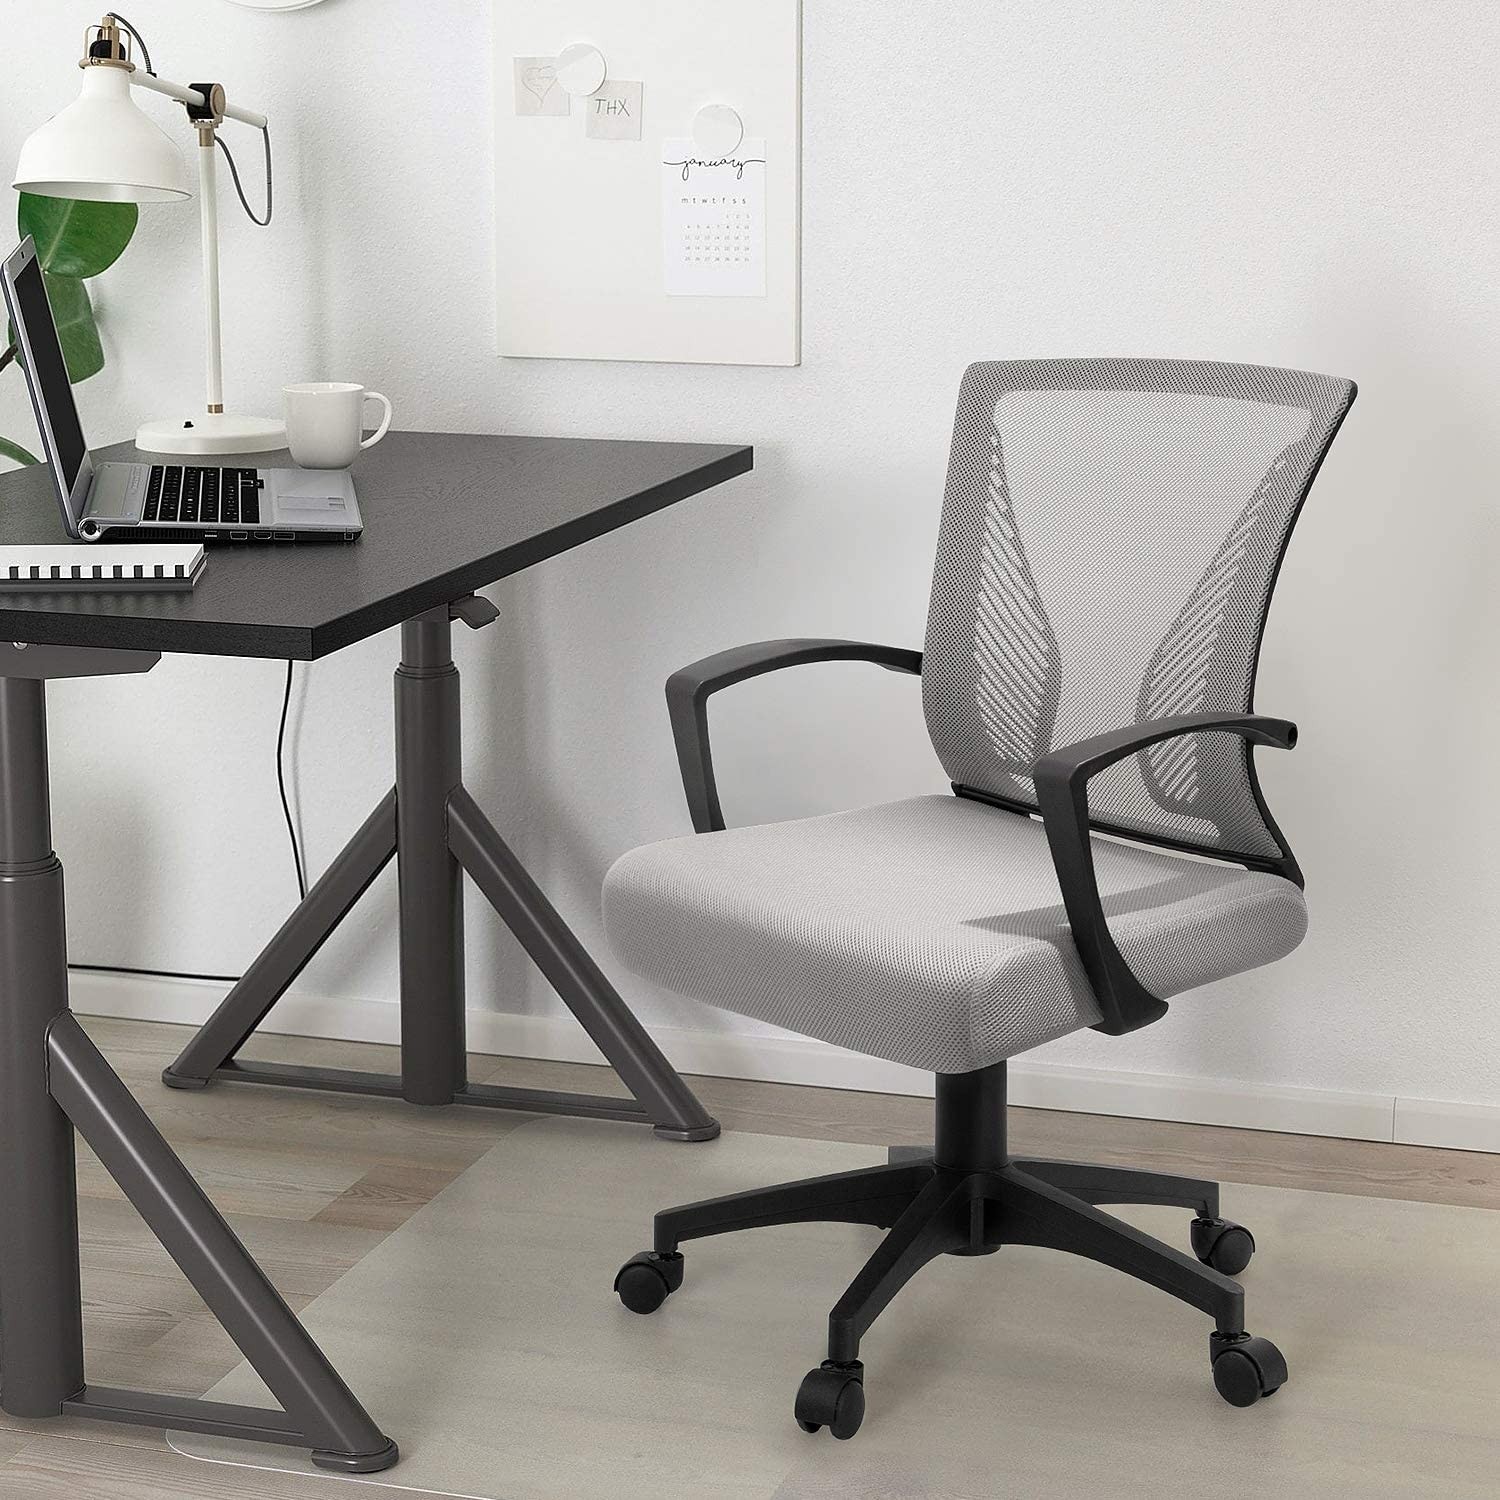 10 Best Desk Chairs for 2021 - Ideas on Foter